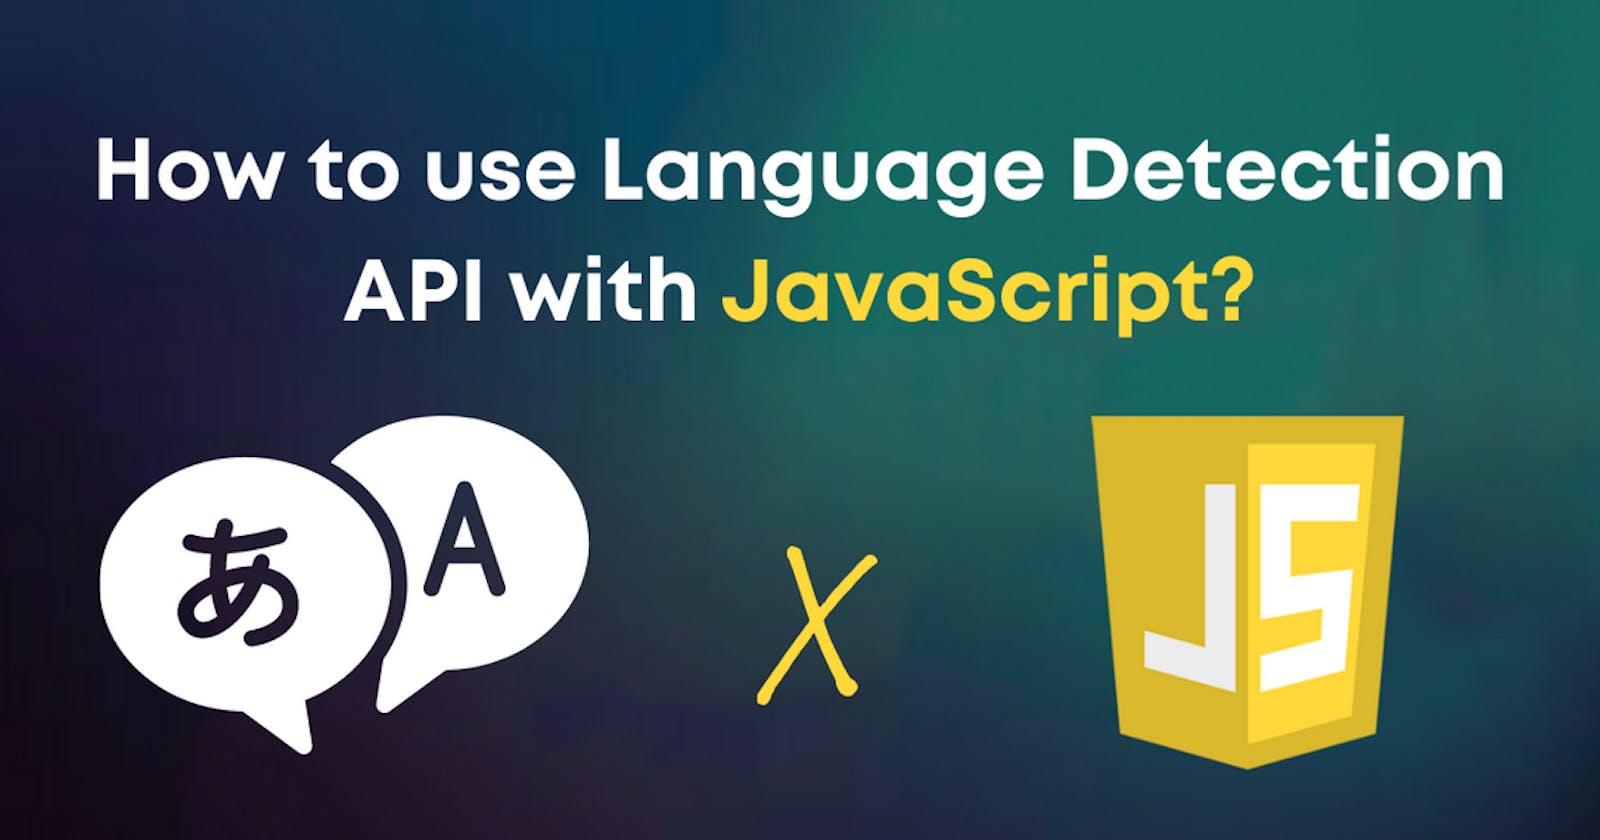 How to use Language Detection API with JavaScript in 5 minutes?